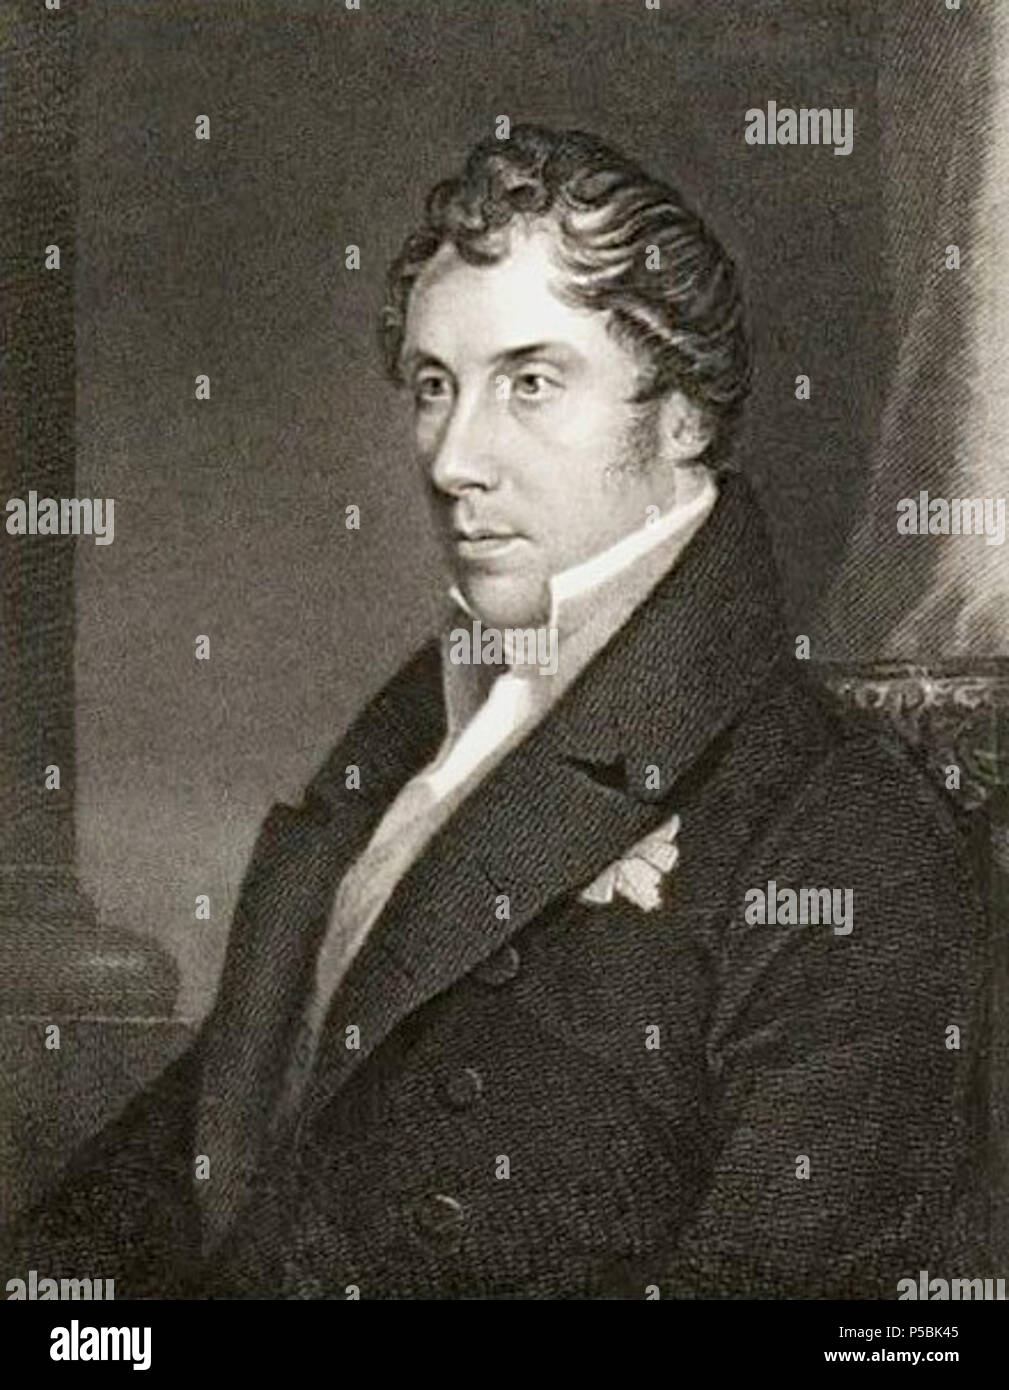 N/A. An engraving of George Hamilton-Gordon, 4th Earl of Aberdeen (28 January 1784 – 14 December 1860). A facsimile signature 'Aberdeen' is featured below the title. Published in London in 1846 by Fisher, Son &Co.. Engraved by   Thomas Woolnoth  (1785–1857)    Alternative names T. Woolnoth; Thomas A. Woolnoth; Sr. Thomas Woolnoth; Thomas, Sr. Woolnoth  Description English painter, engraver and printmaker  Date of birth/death 1785 1857  Location of birth/death London Audlem  Work location London; Edinburgh  Authority control  : Q16859233 VIAF:95770889 ULAN:500014663 RKD:85562    from National P Stock Photo